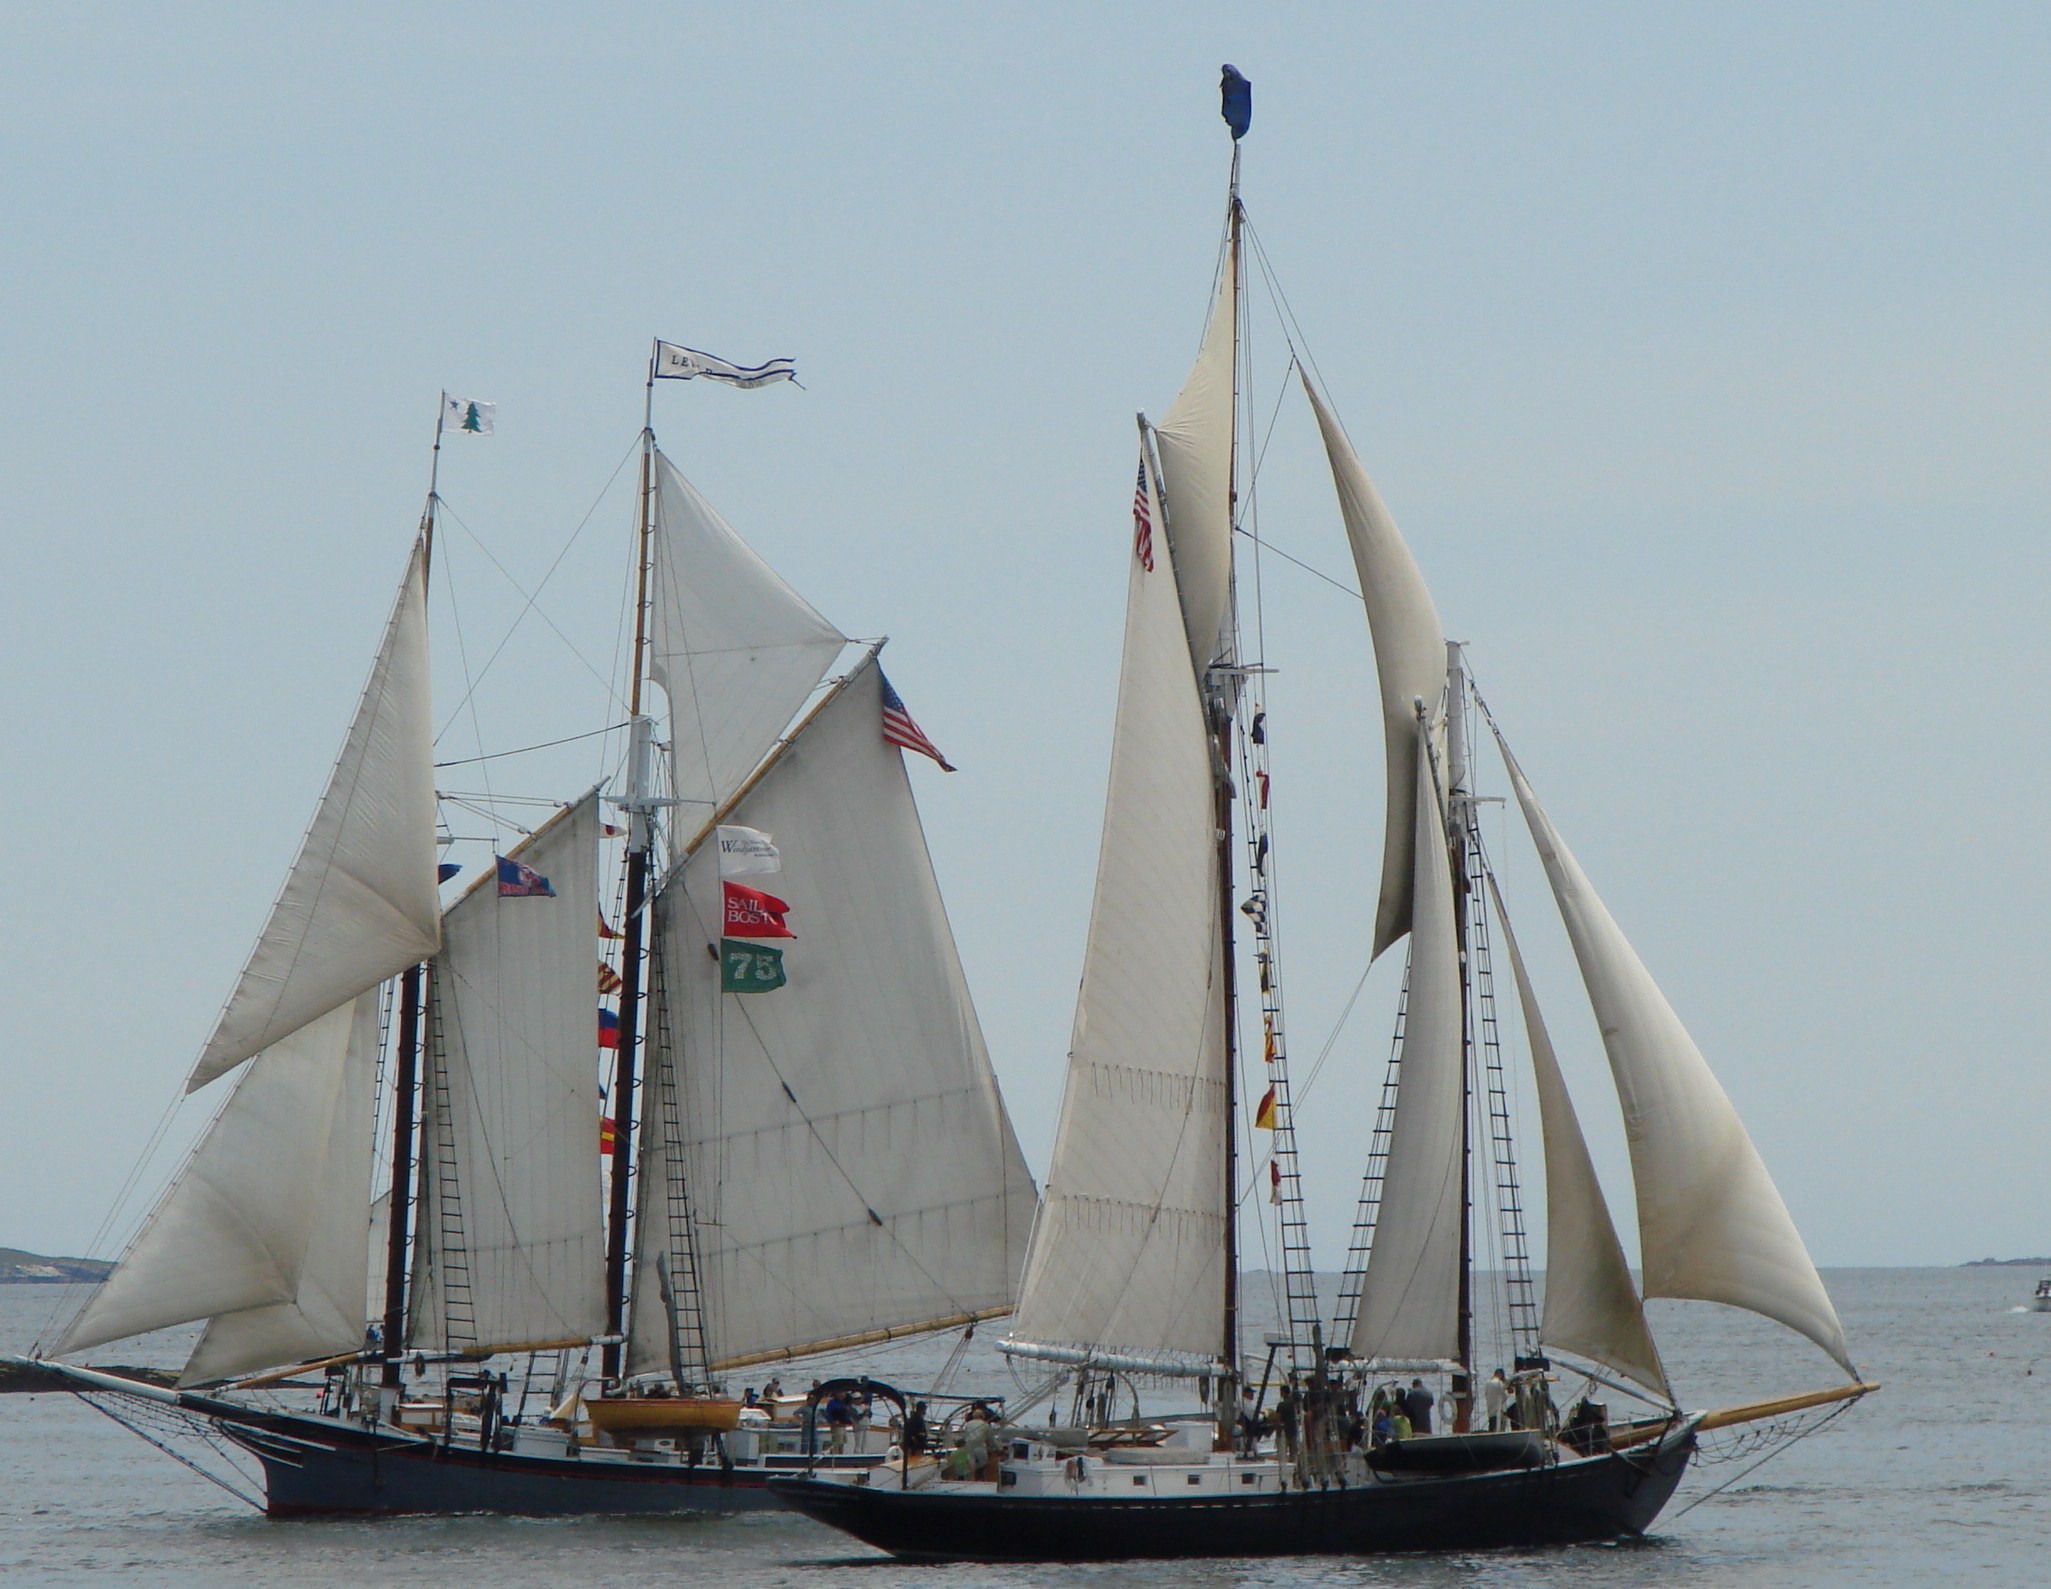 Windjammer Days-boothbay, Me (user submitted)